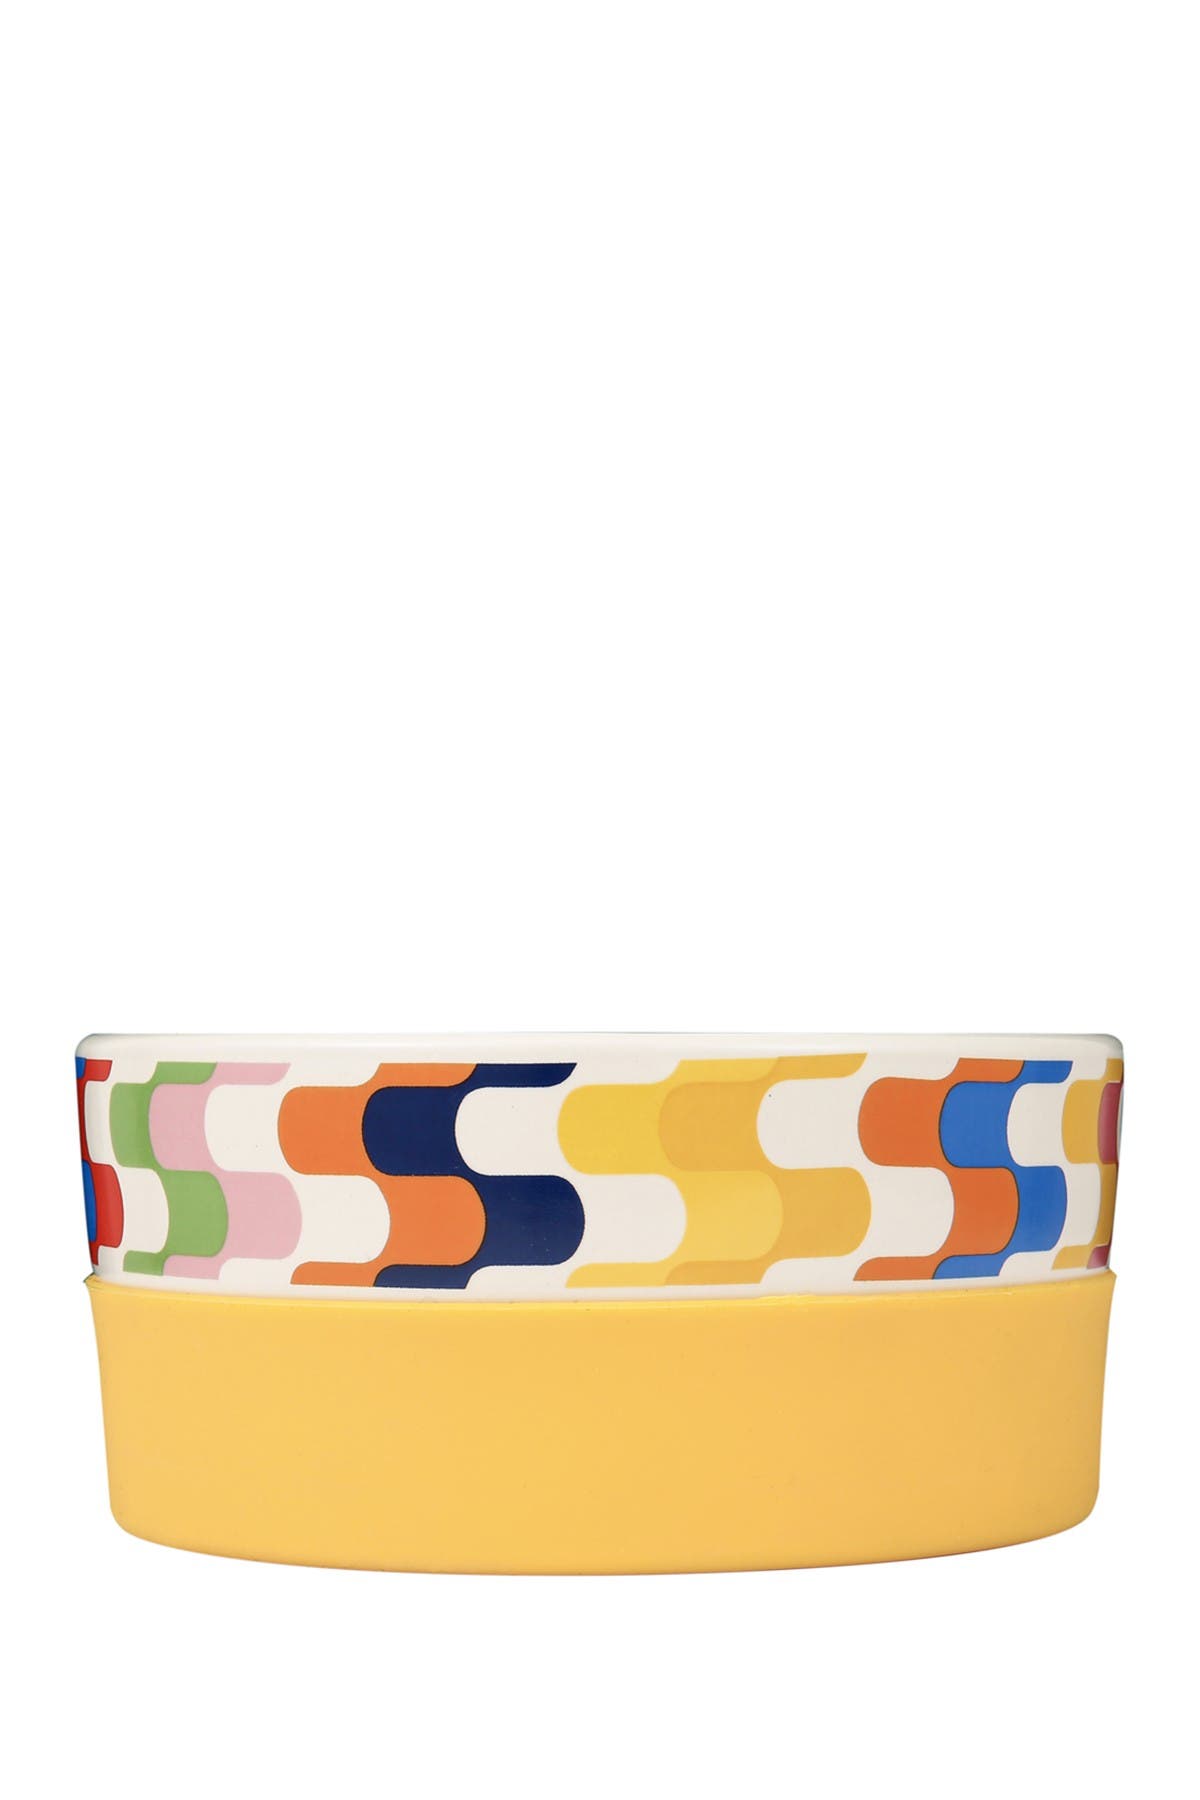 Fetch 4 Pets Jonathan Adler: Now House "bargello" Duo Dog Bowl In Multi